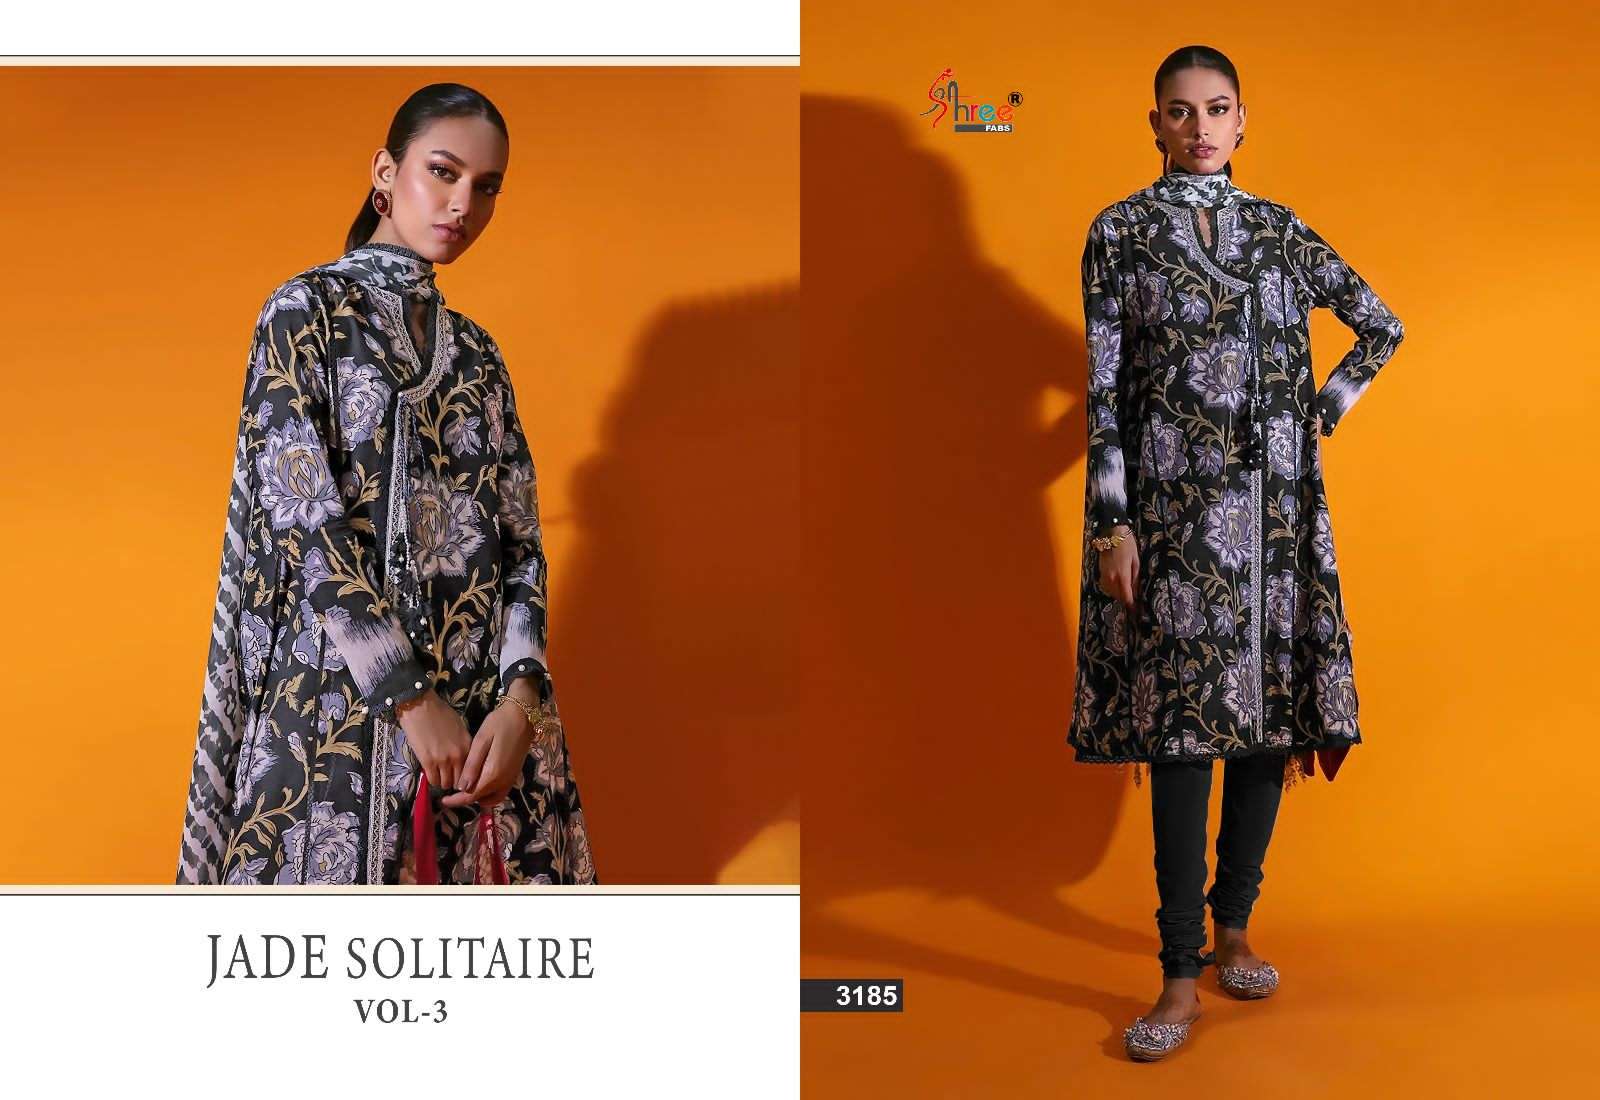 Jade Solitaire Vol-3 By Shree Fabs 3181 To 3186 Series Beautiful Pakistani Suits Colorful Stylish Fancy Casual Wear & Ethnic Wear Pure Cotton Embroidered Dresses At Wholesale Price